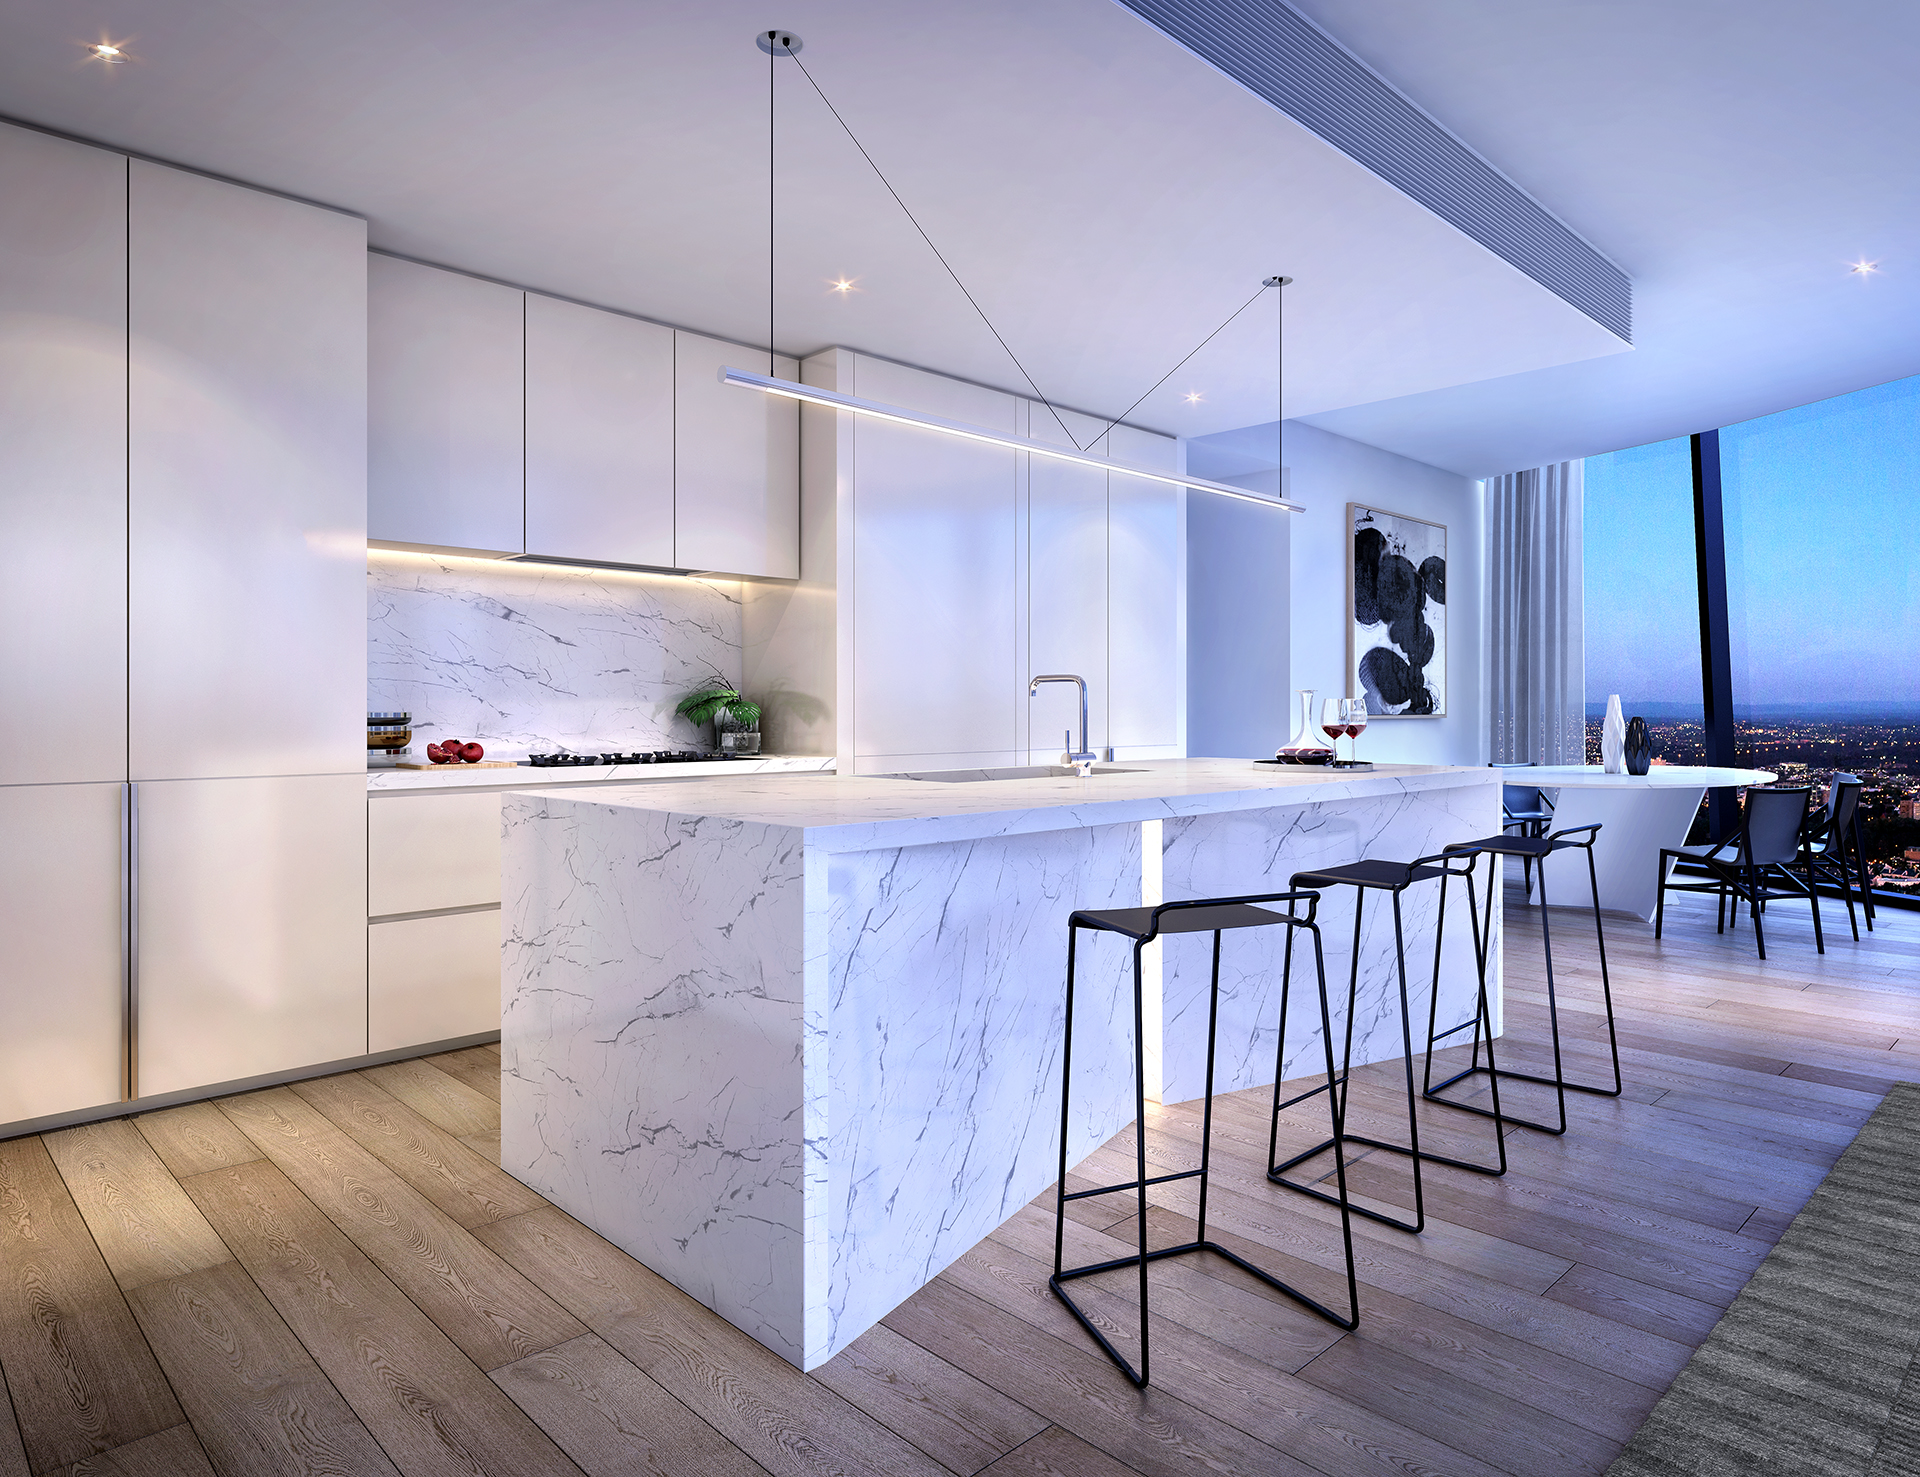 Kitchens are designed with amenity and aesthetics alike in mind